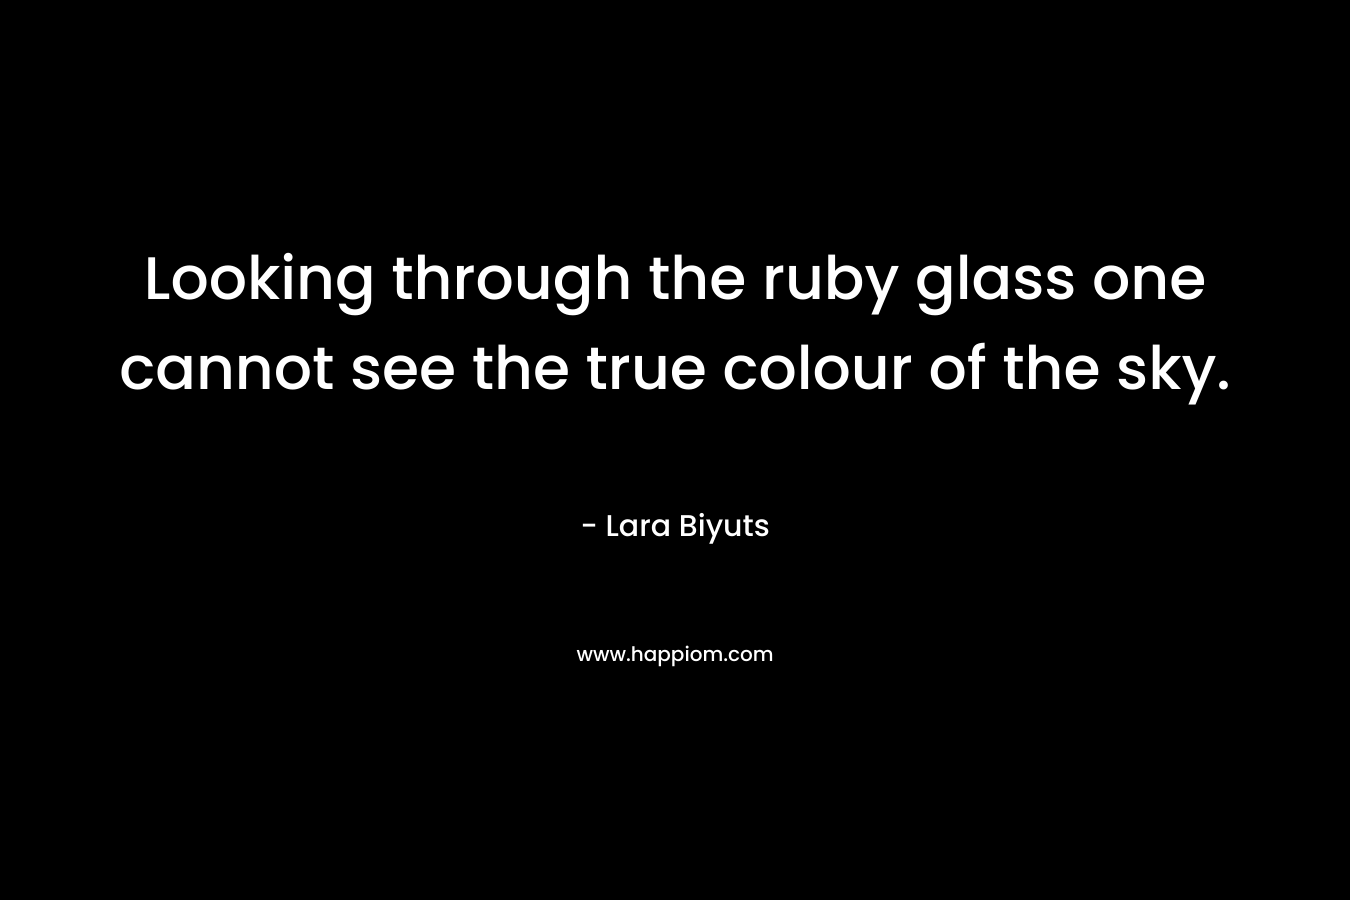 Looking through the ruby glass one cannot see the true colour of the sky. – Lara Biyuts